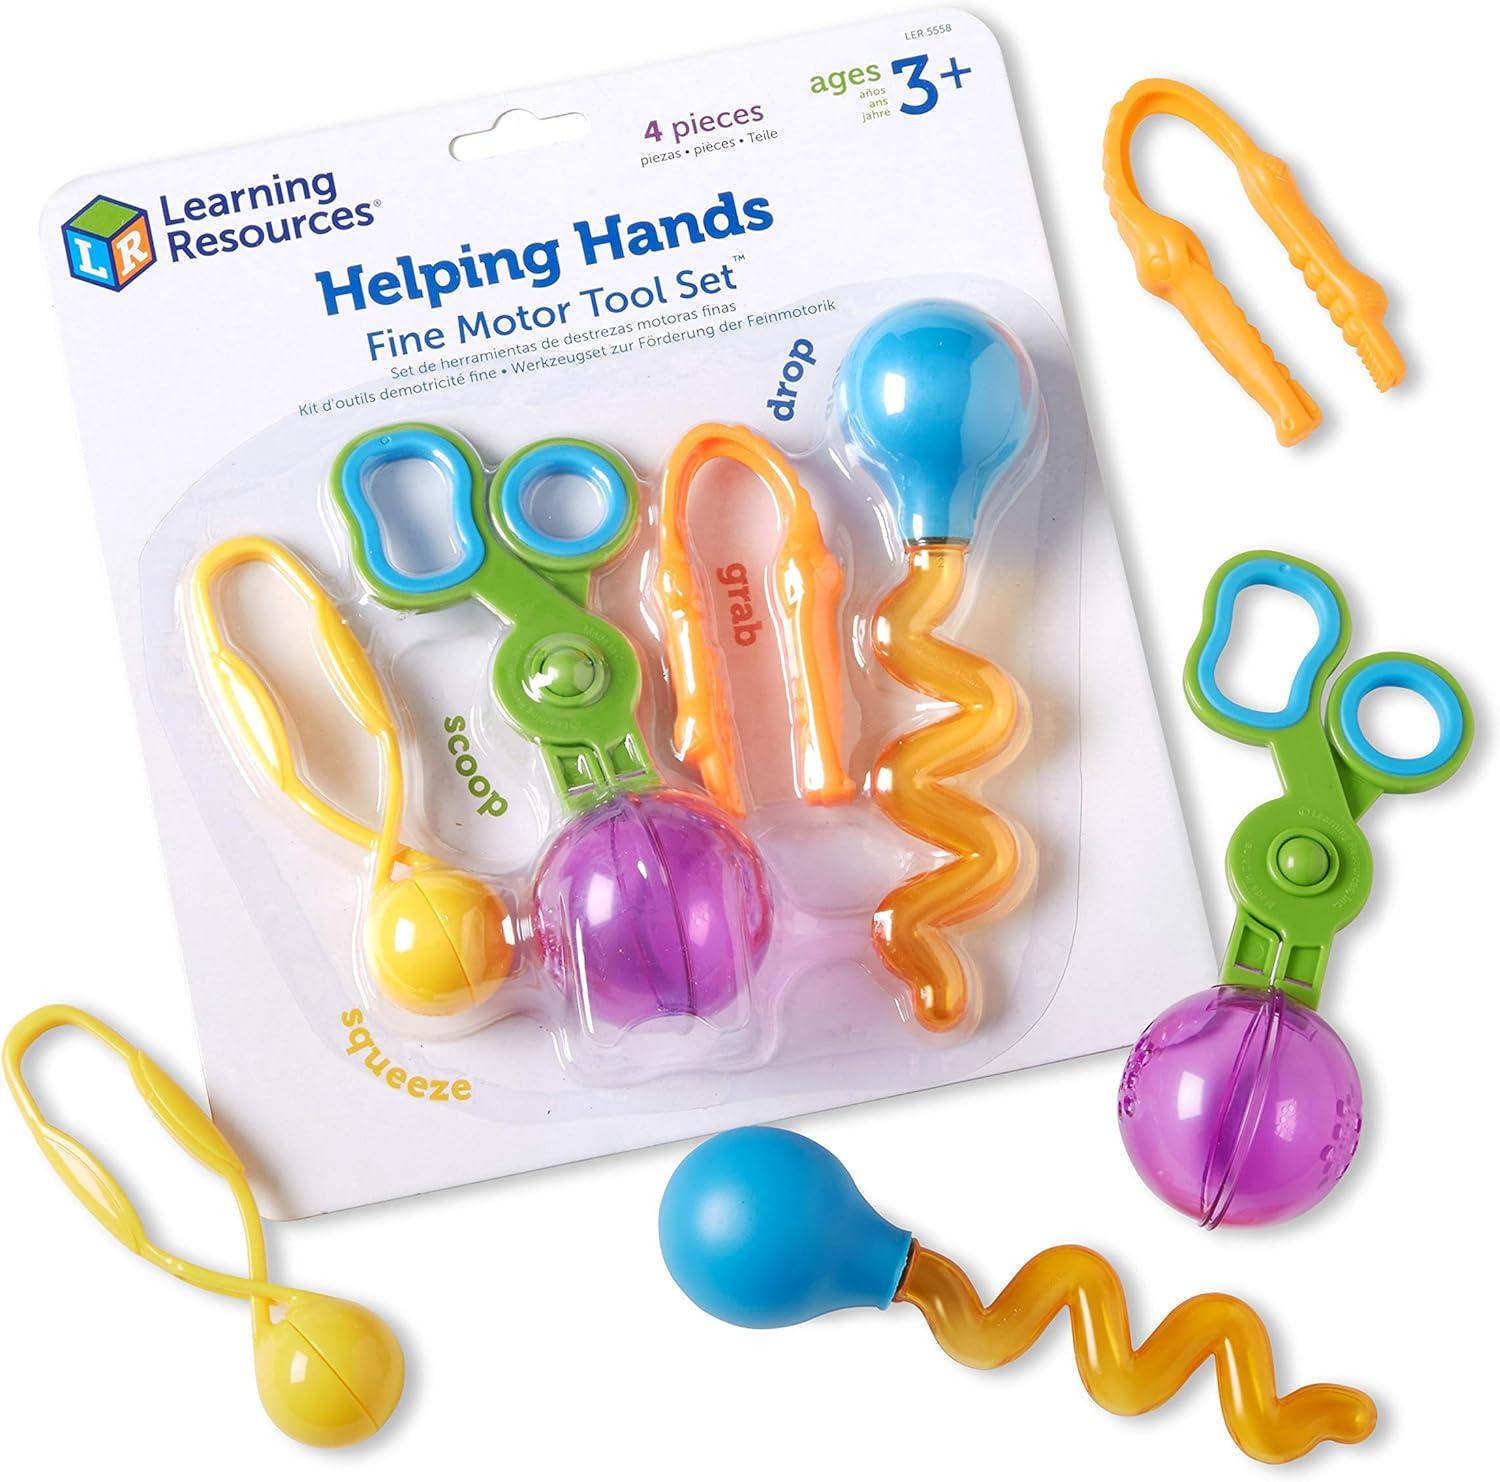 Learning Resources Helping Hands Fine Motor Tool Set Toy